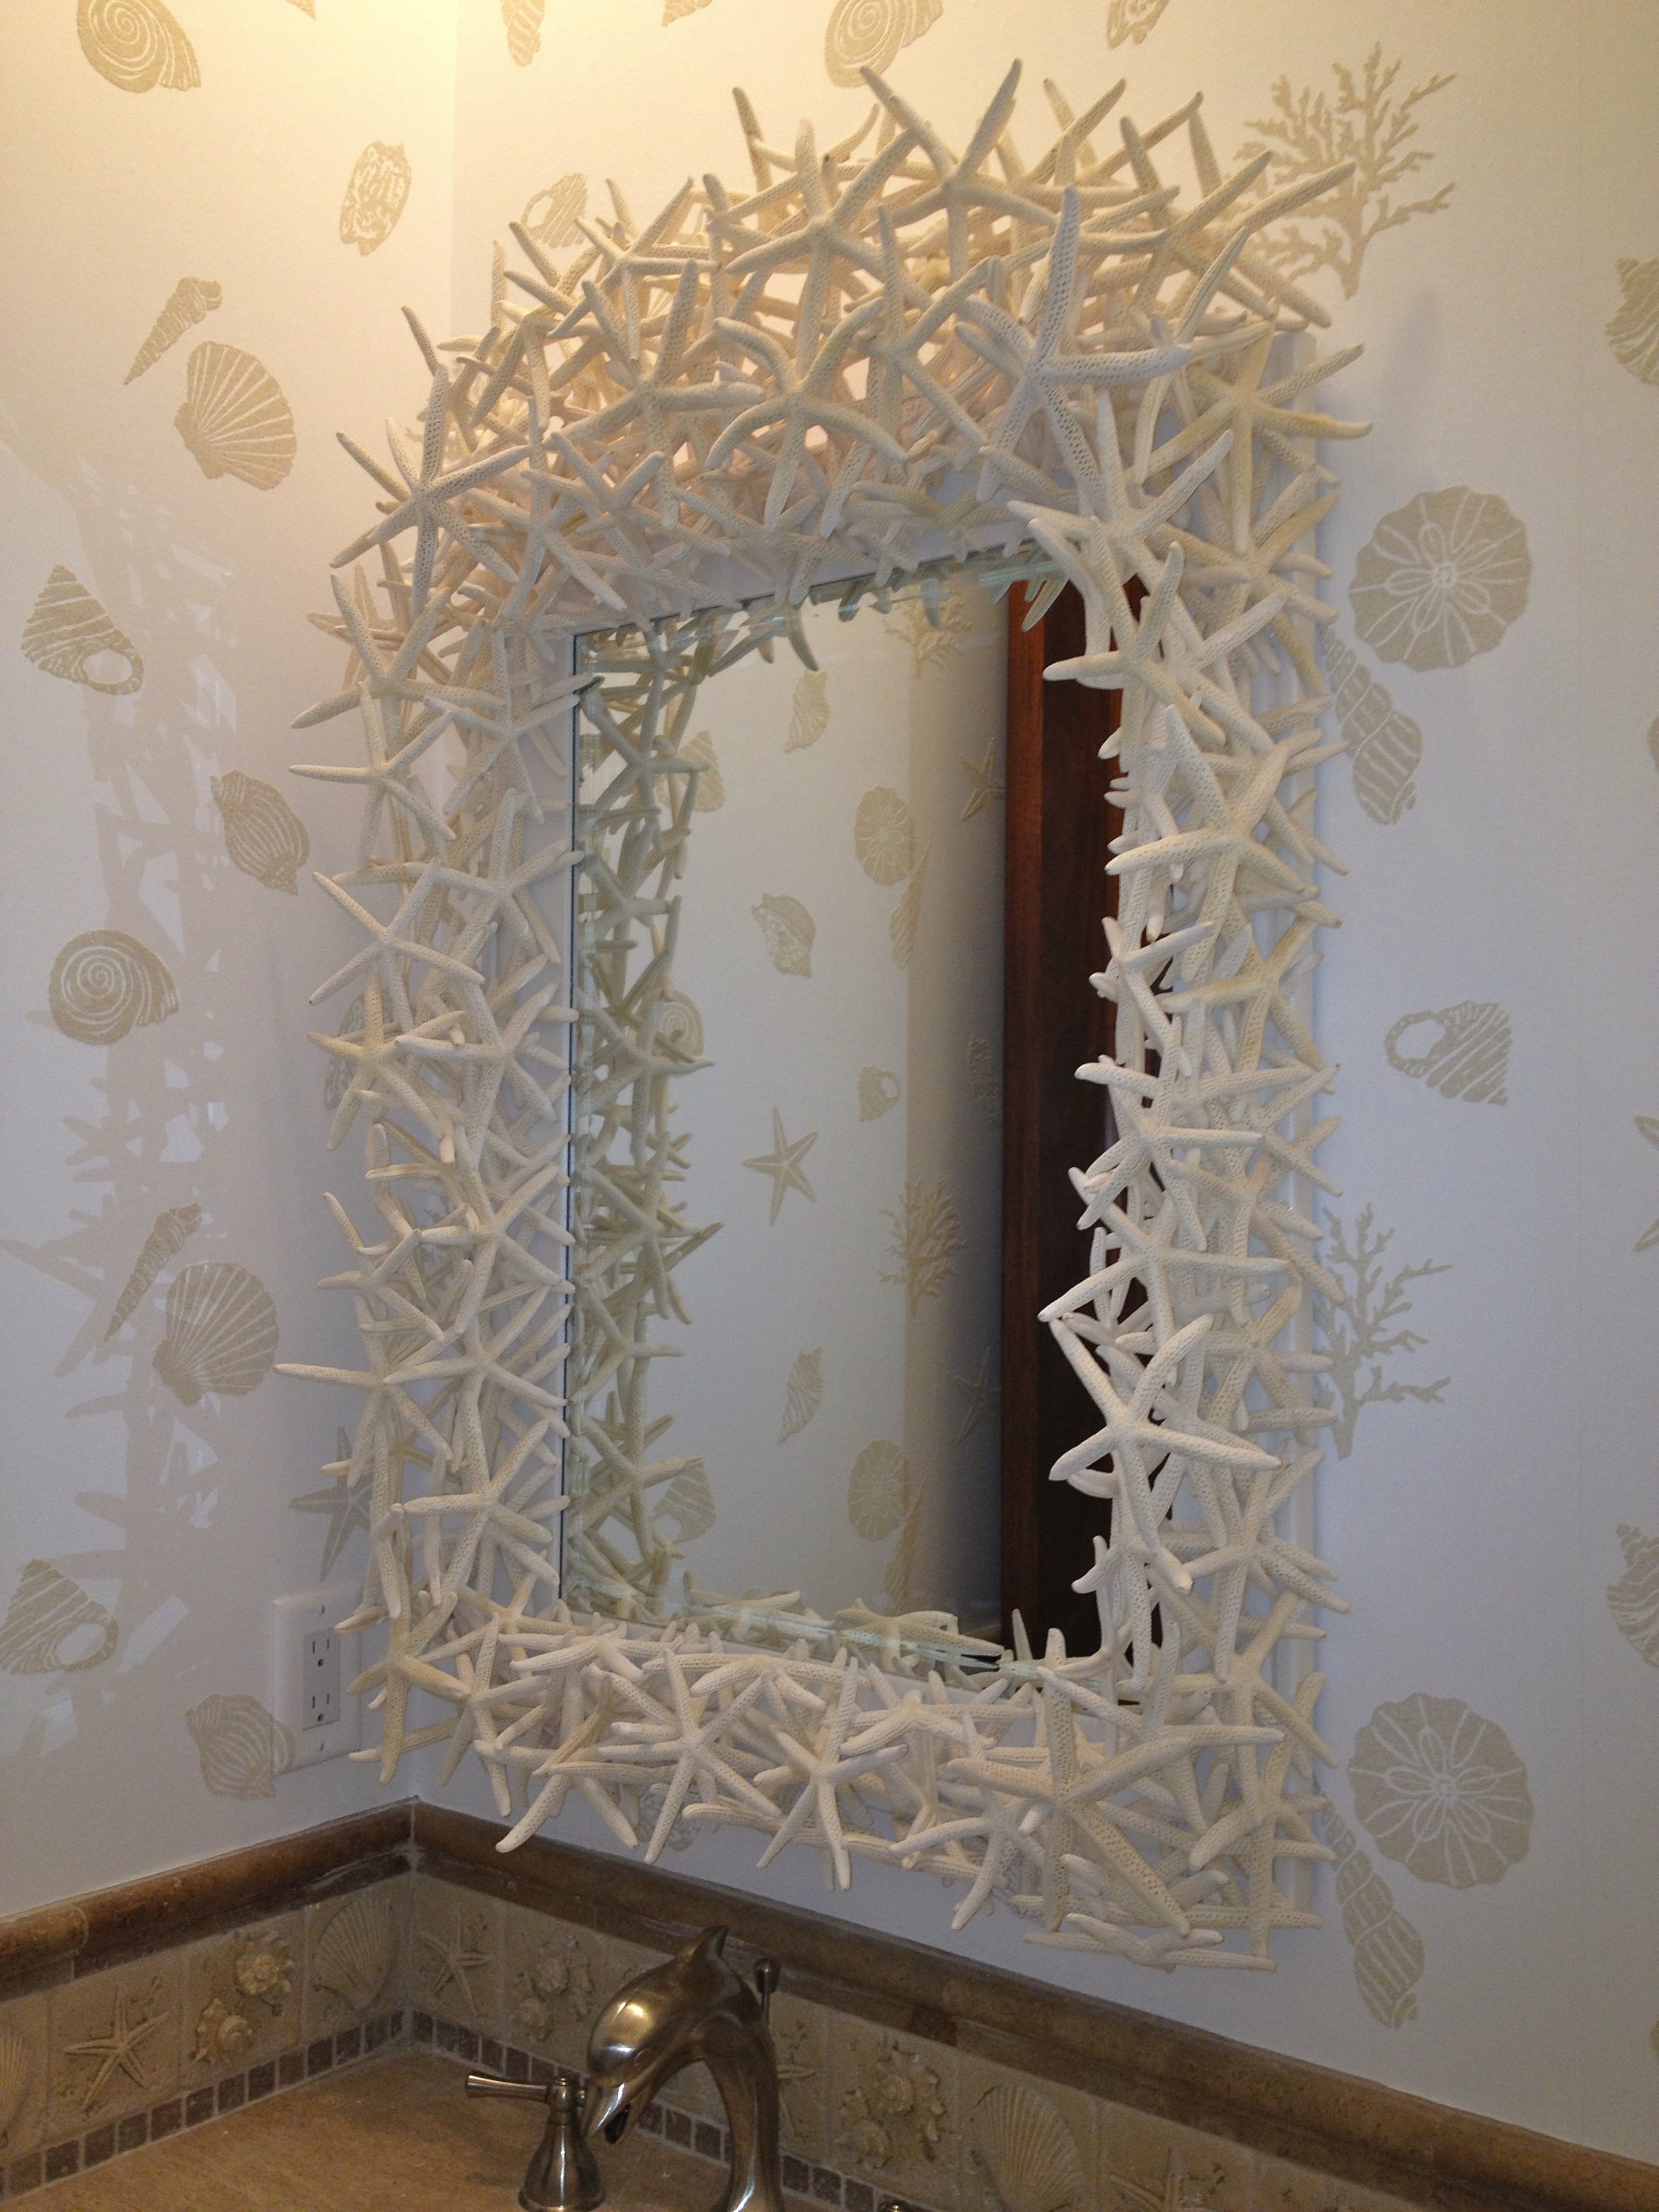 Mirror made with white starfish hangs on a wall with white wall paper with tan shells on it.